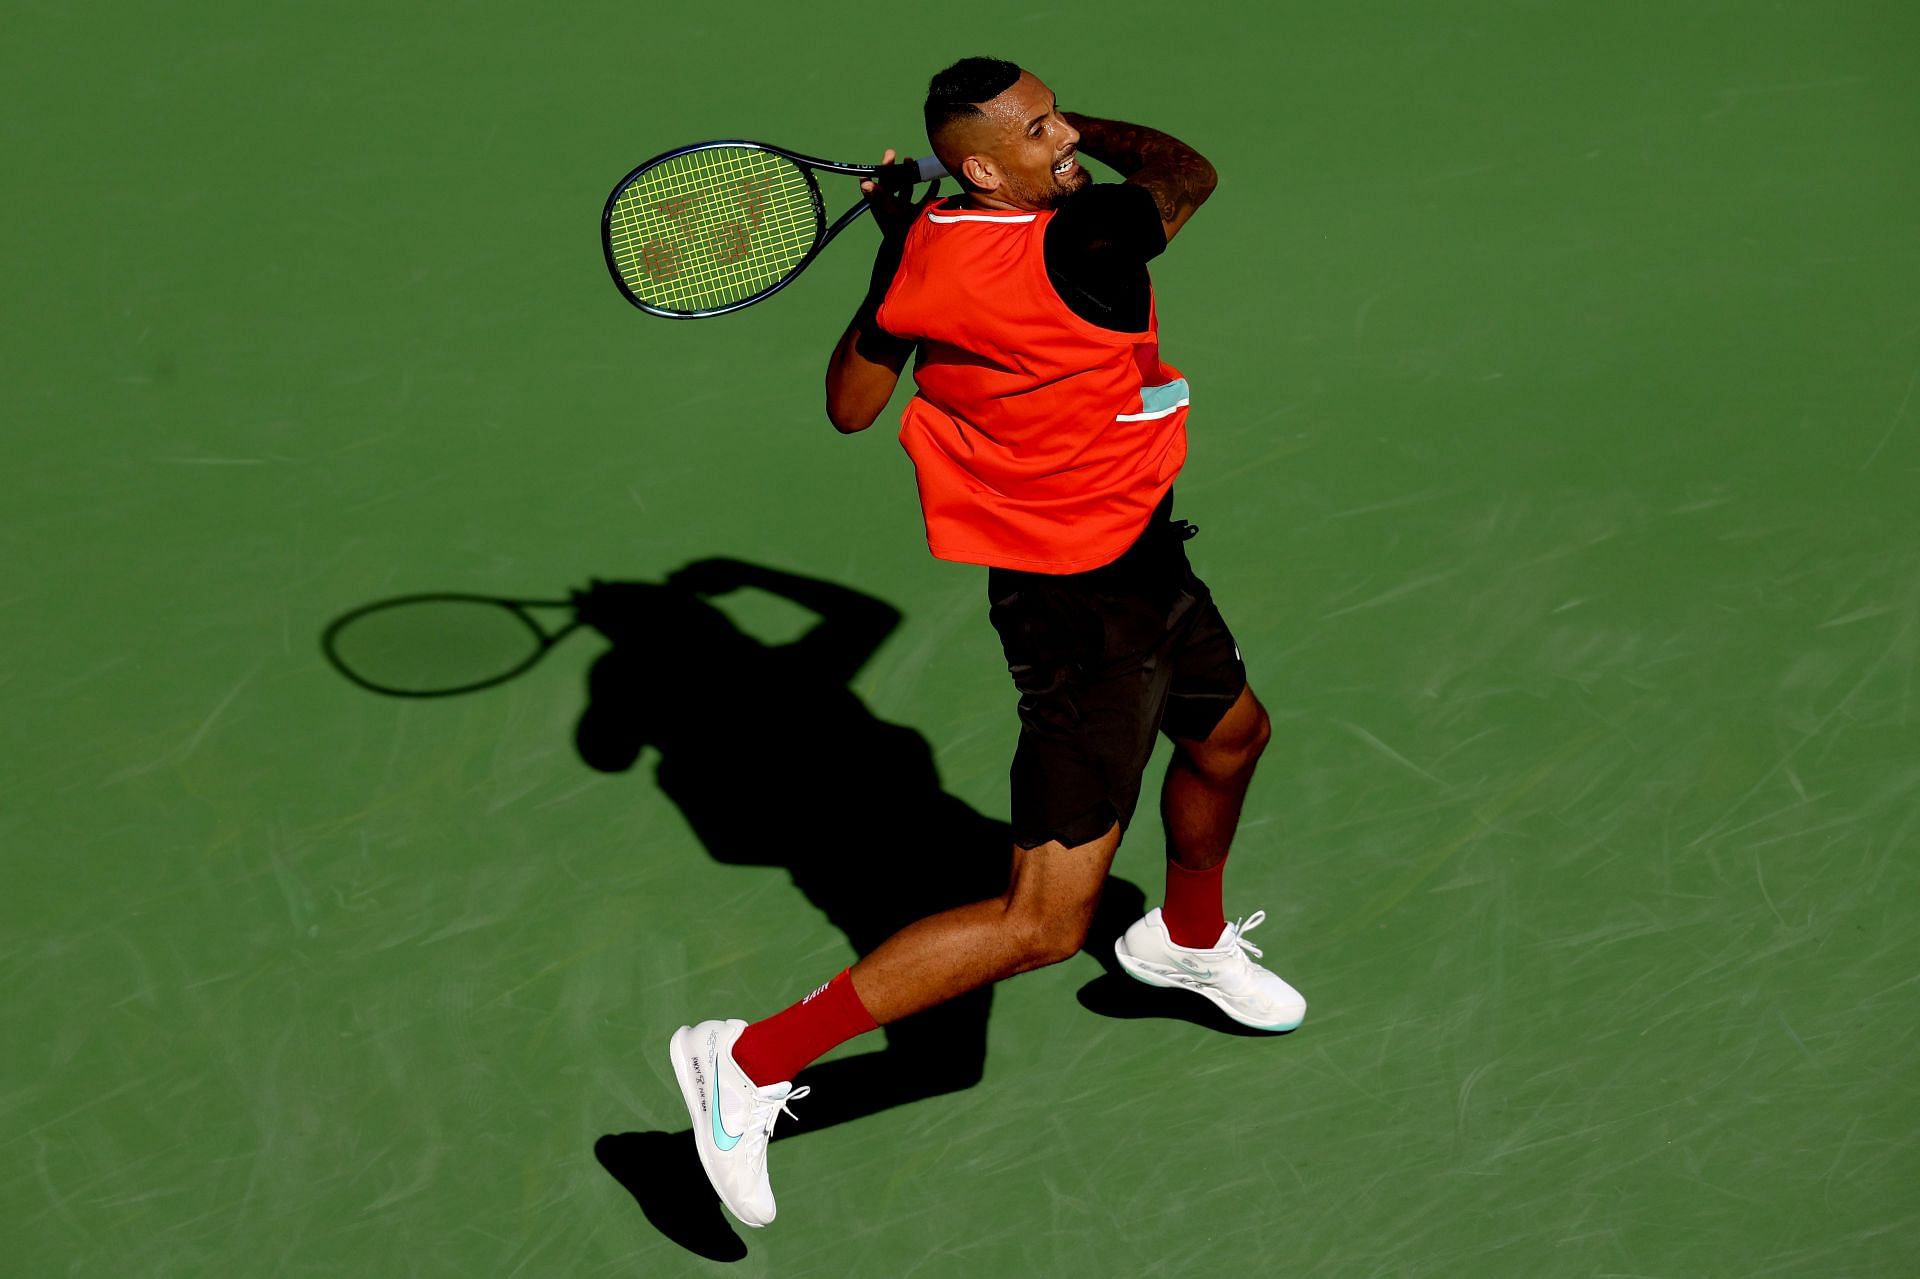 Nick Kyrgios in action at the BNP Paribas Open